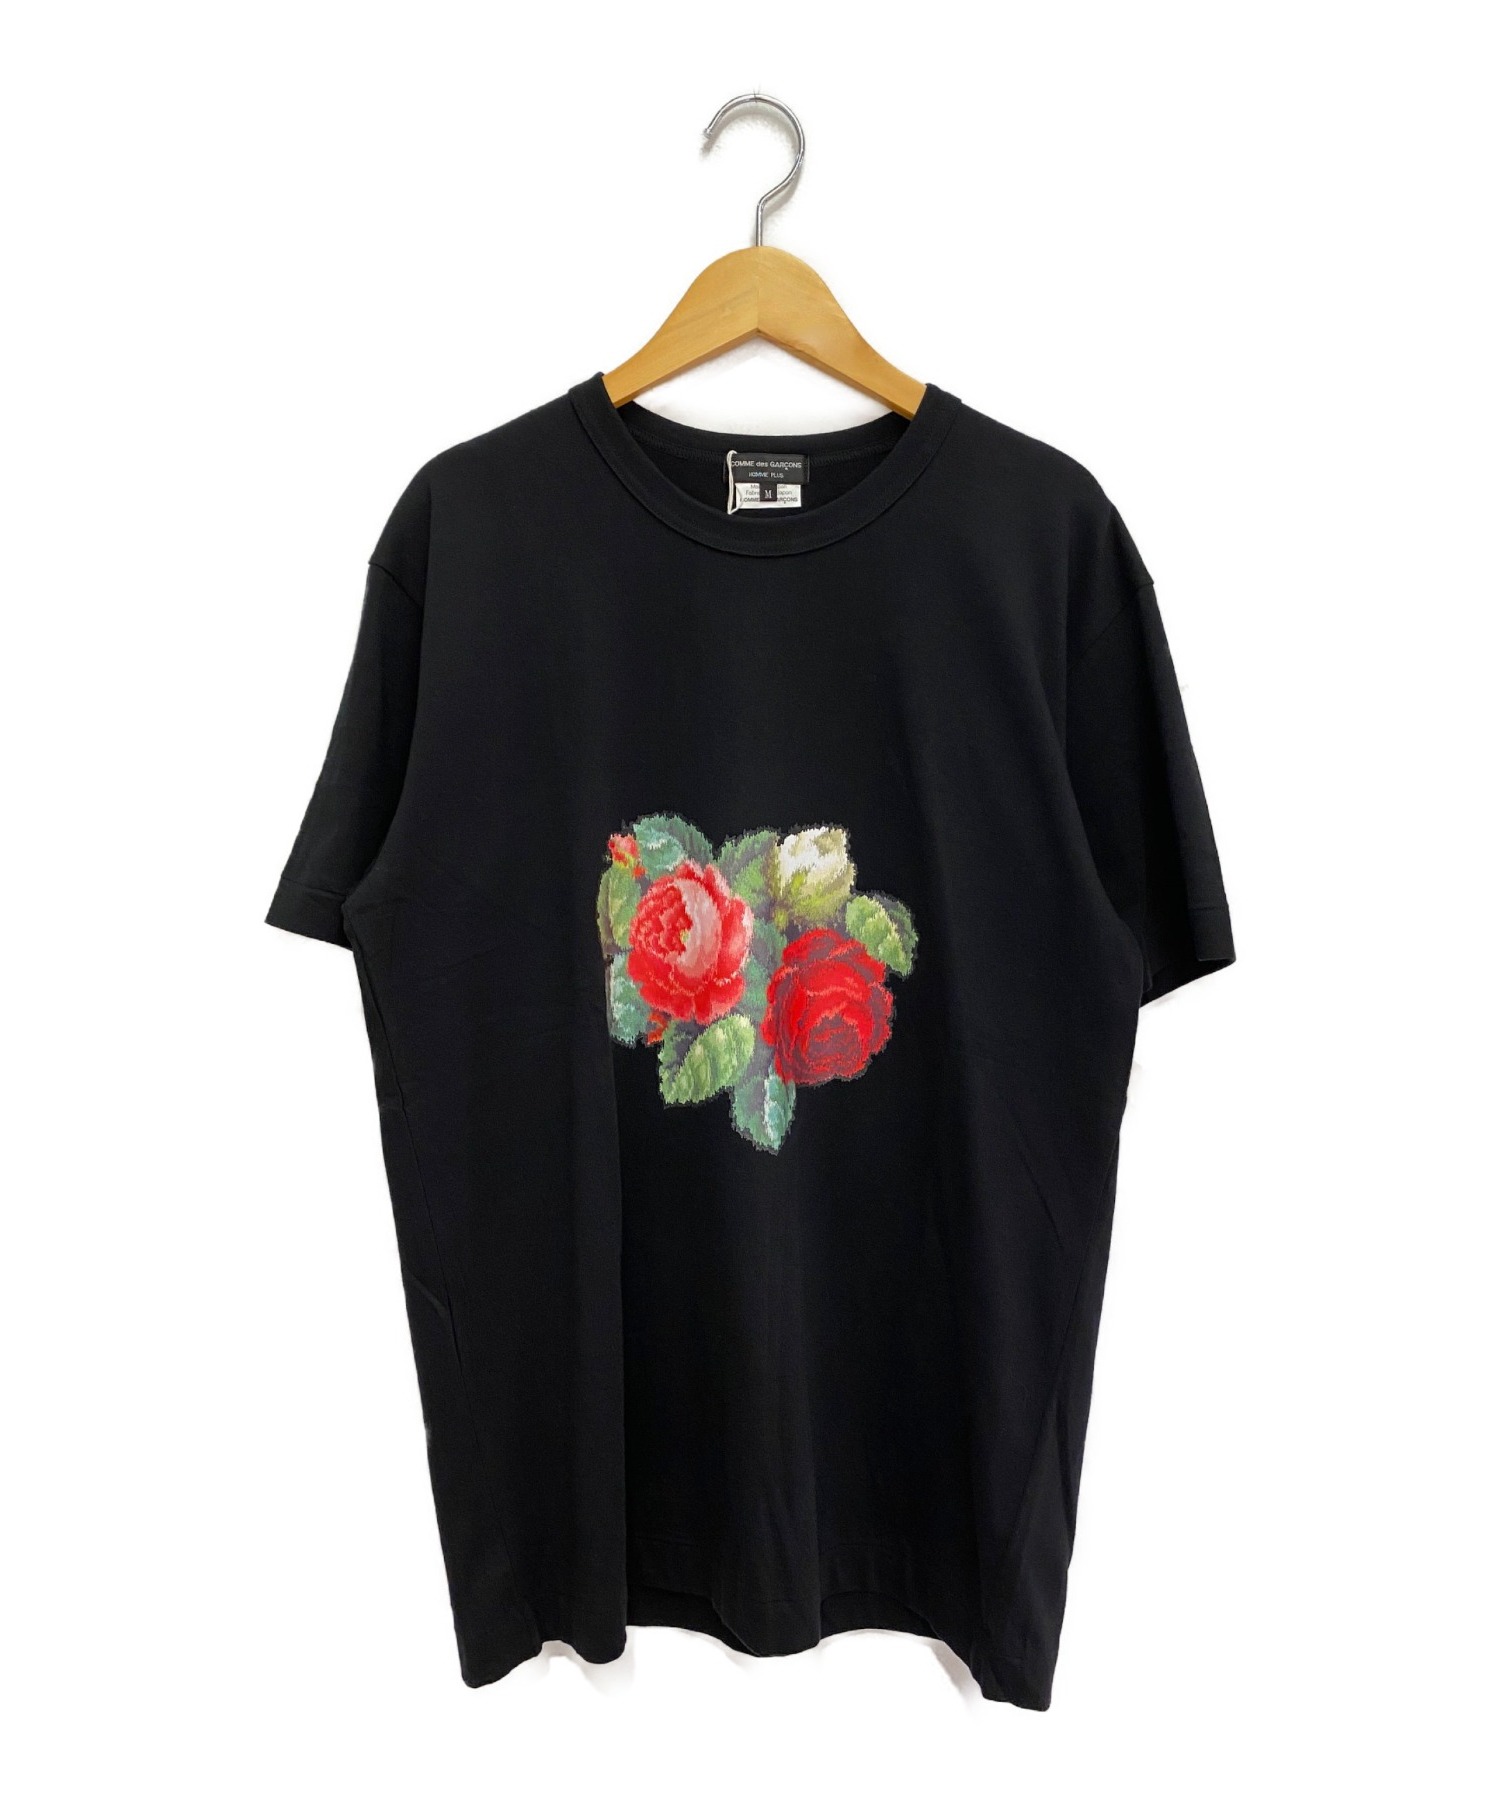 Comme des Garcons homme plus 12aw 薔薇プリント